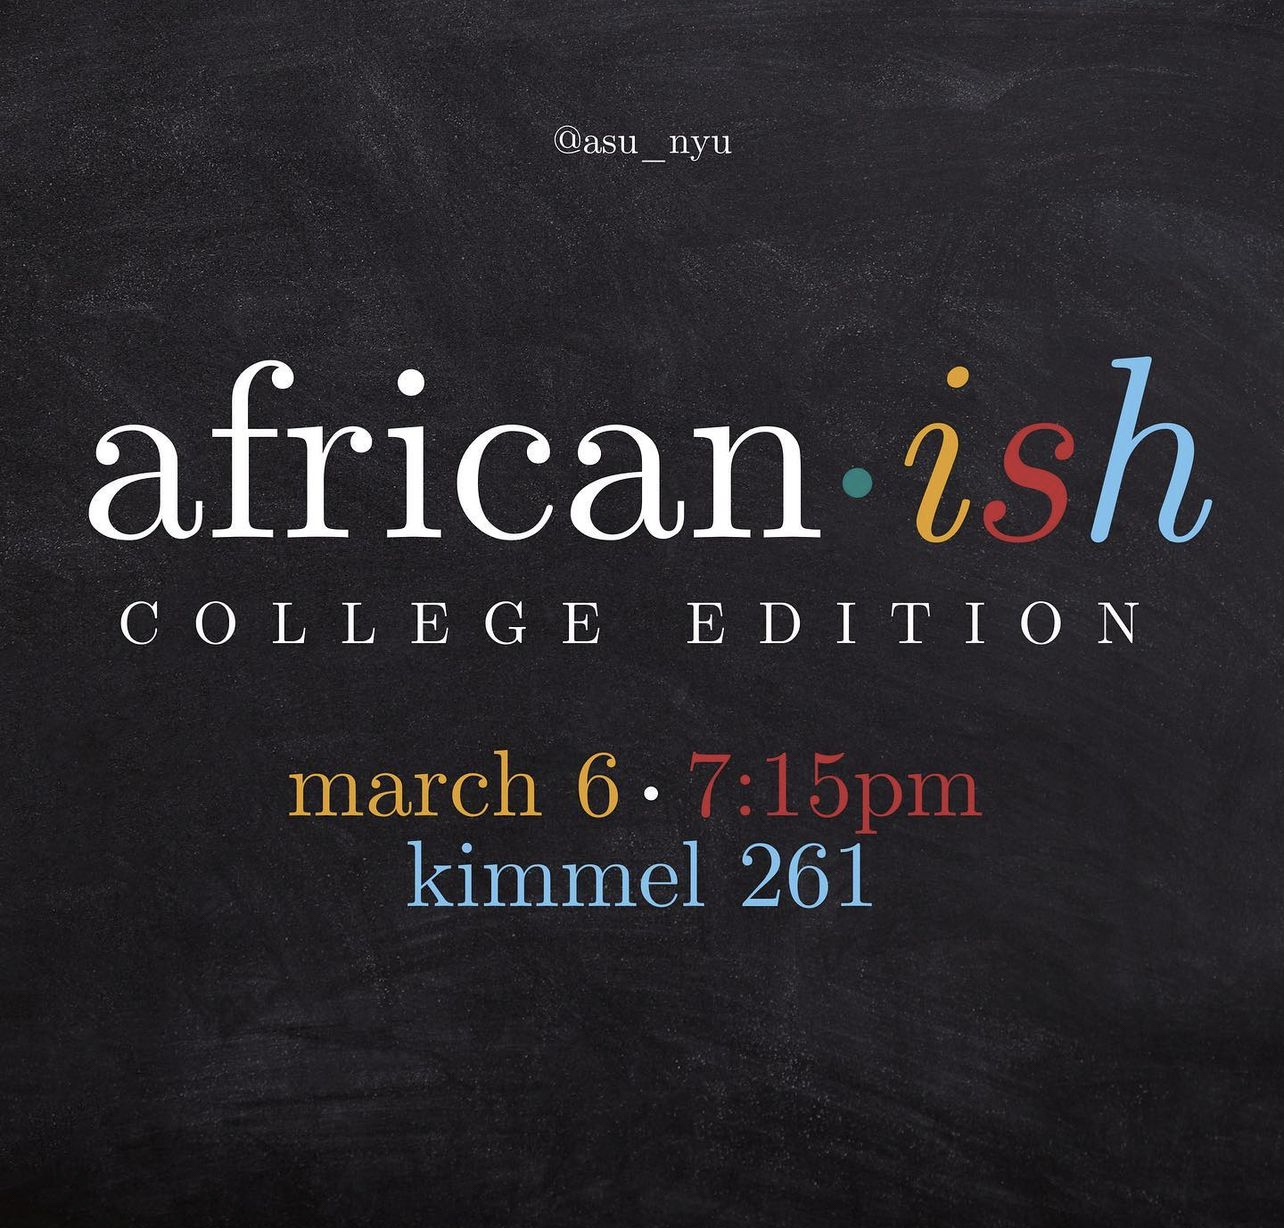 A marketing poster for an ASU Africanish, College Edition, event.